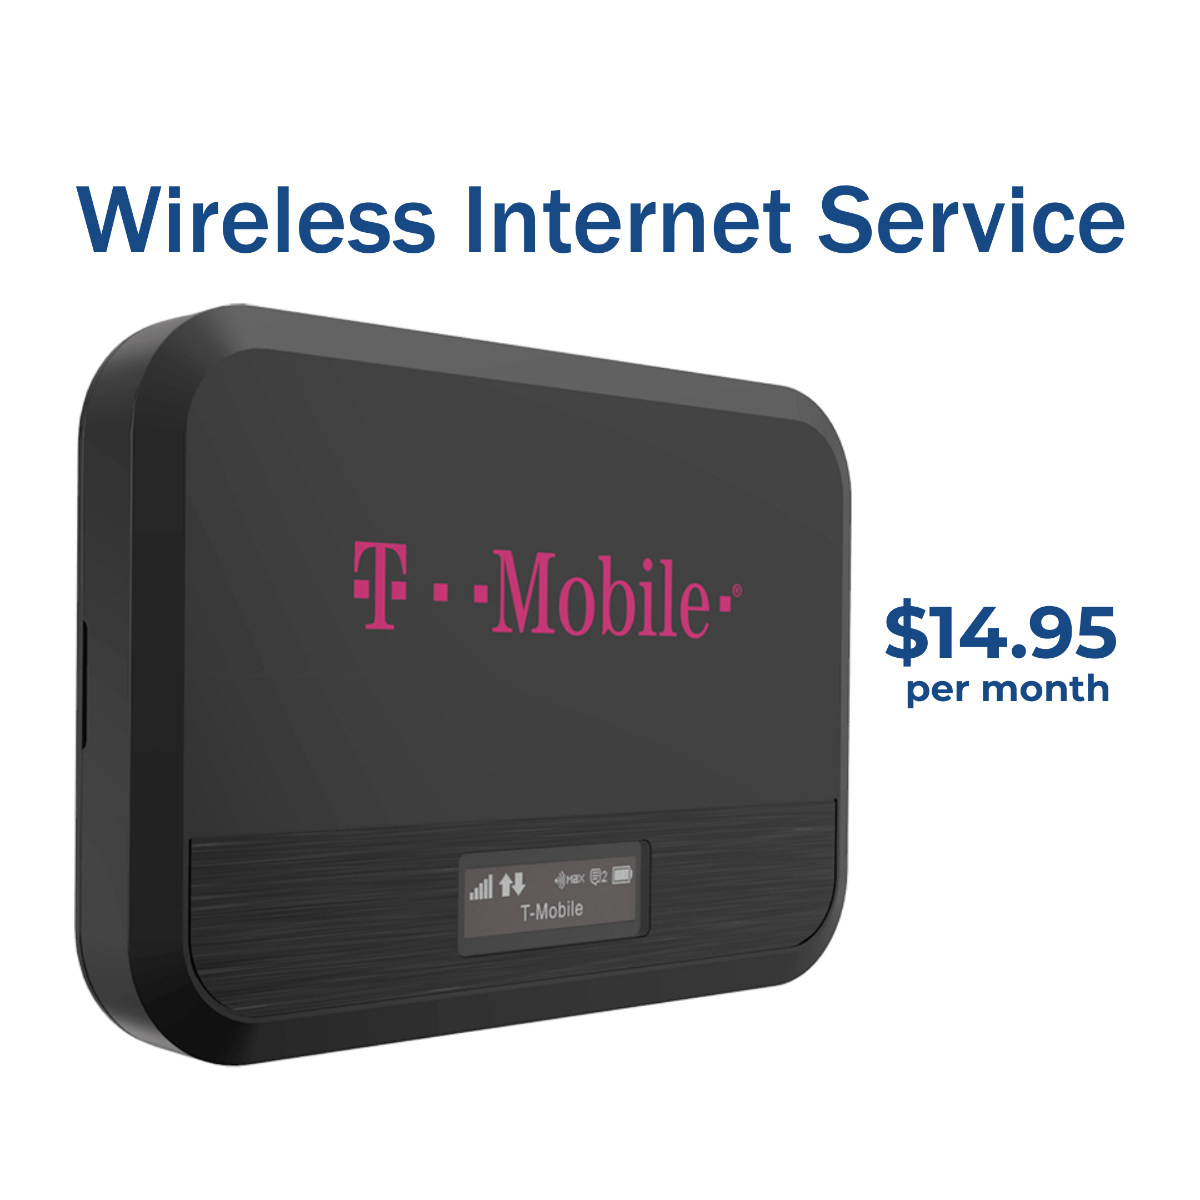 Mobile Citizen WiFi Hotspot with Monthly Internet Subscription